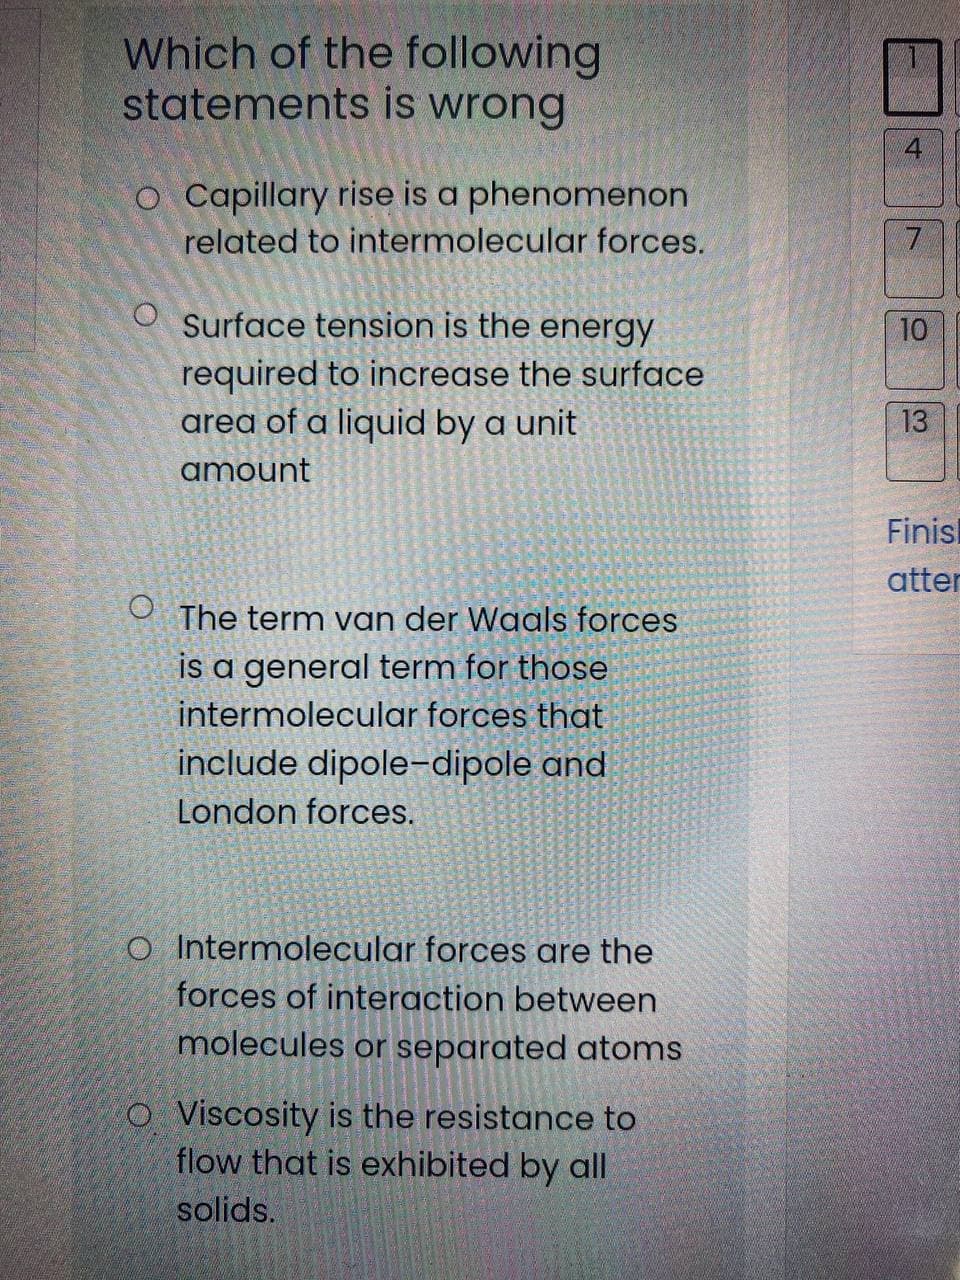 Which of the following
statements is wrong
o Capillary rise is a phenomenon
related to intermolecular forces.
Surface tension is the energy
10
required to increase the surface
area of a liquid by a unit
13
amount
Finisl
atter
O The term van der Waals forces
is a general term for those
intermolecular forces that
include dipole-dipole and
London forces.
O Intermolecular forces are the
forces of interaction between
molecules or separated atoms
O Viscosity is the resistance to
flow that is exhibited by all
solids.
